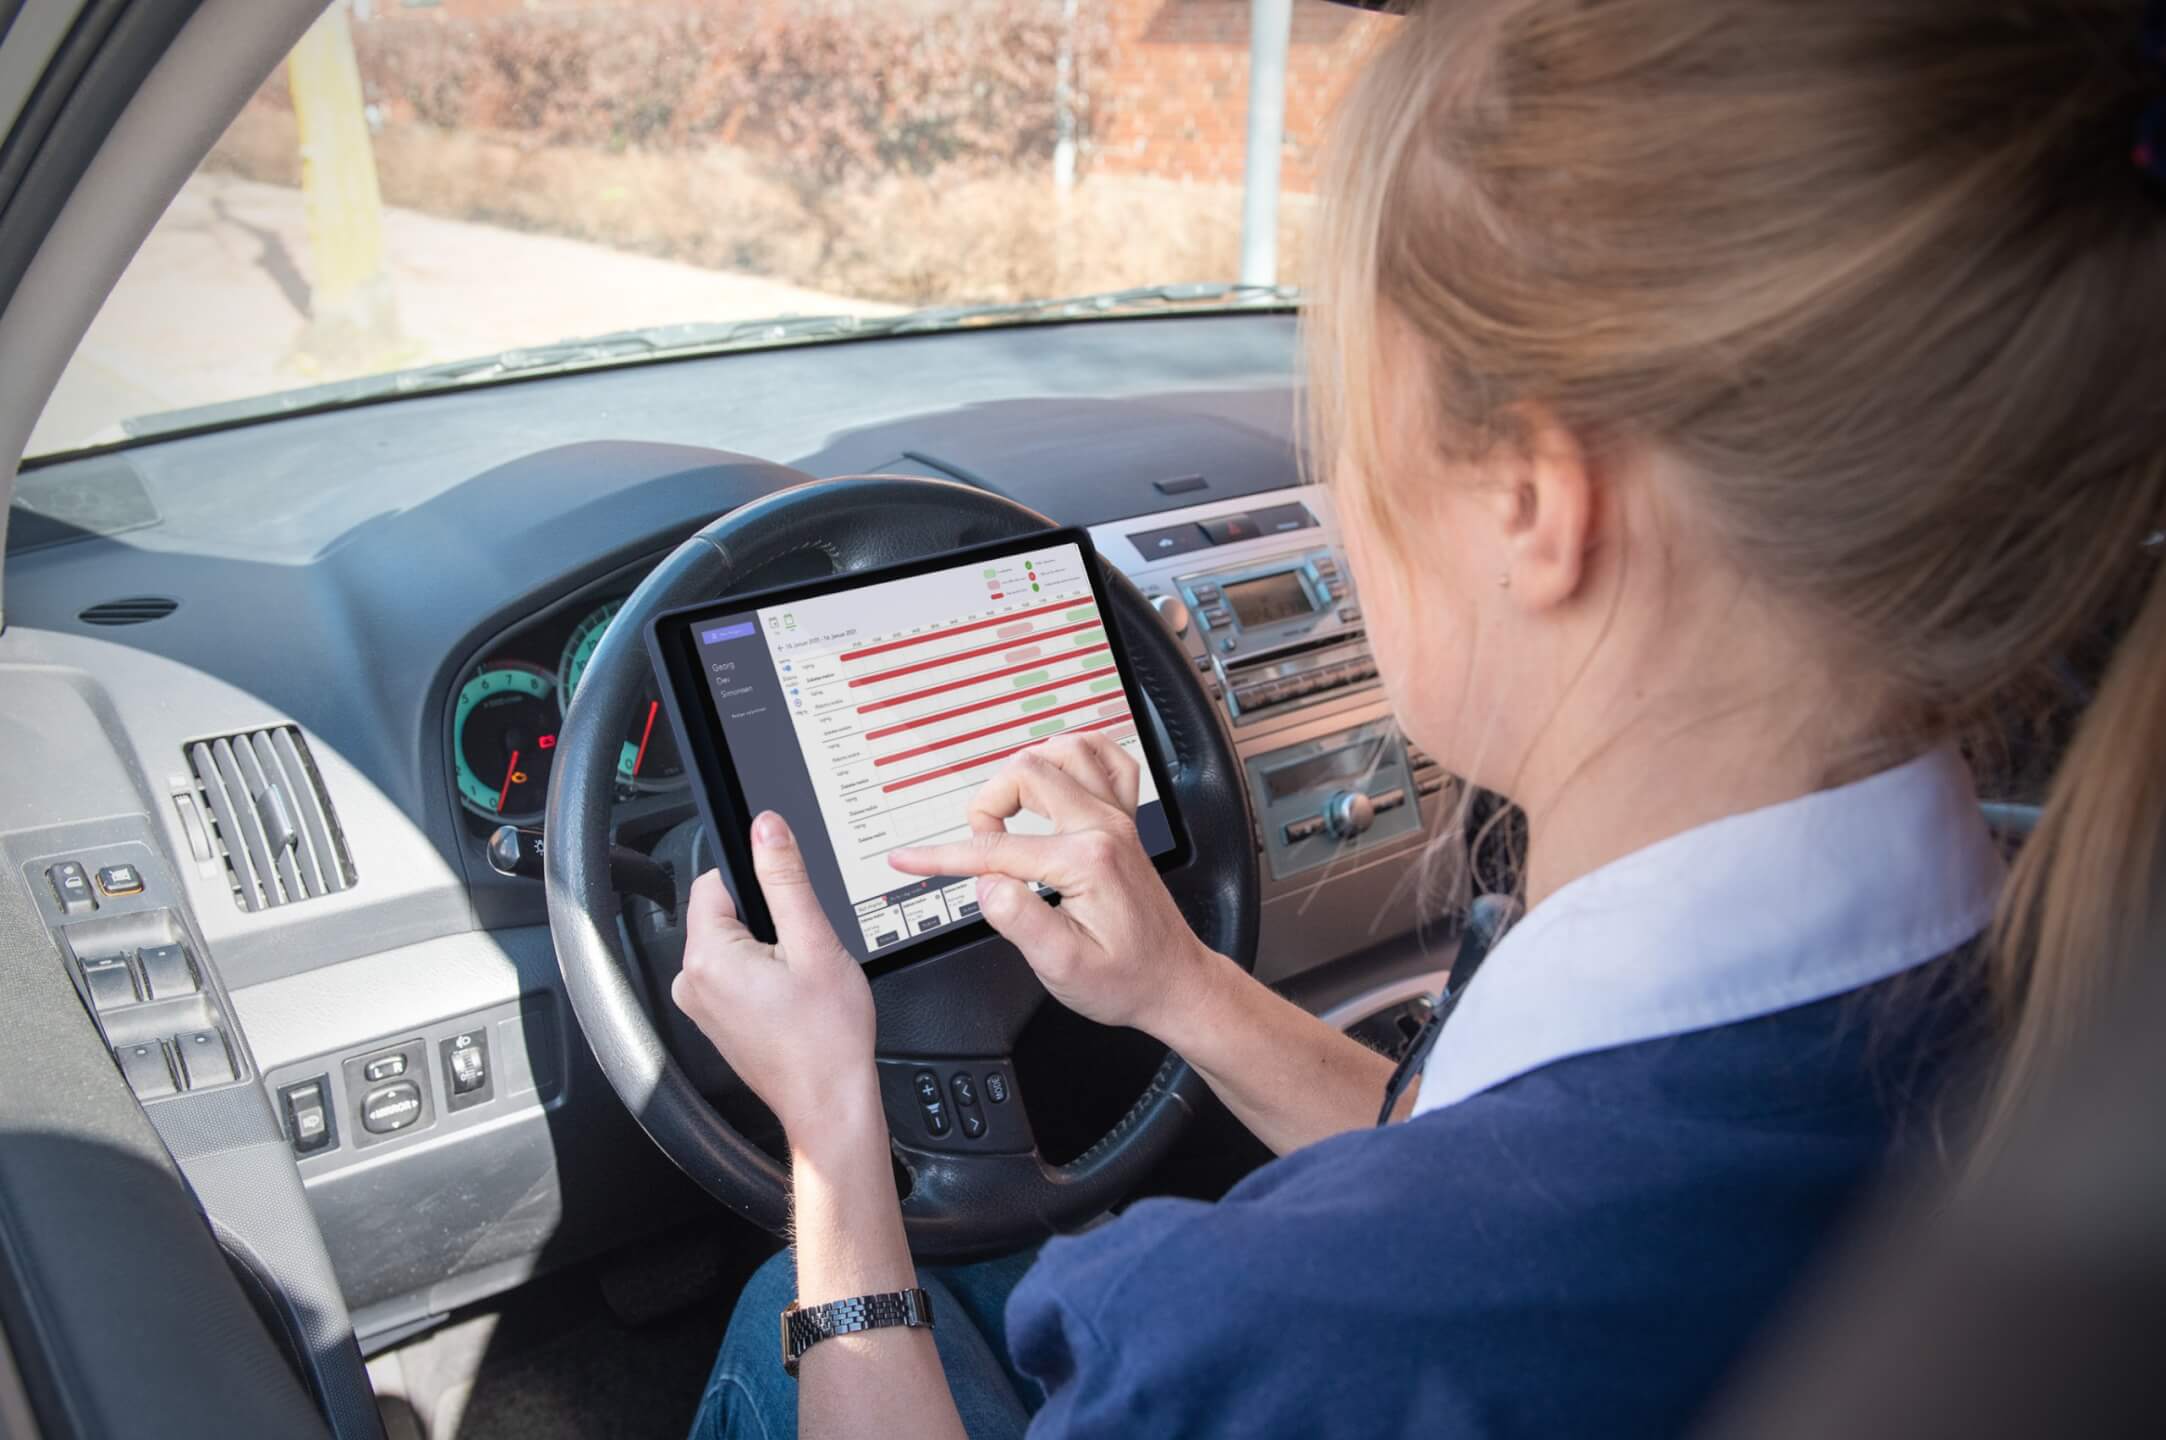 Care professional sitting in her car with her tablet, showing the Klikkit dashboard.